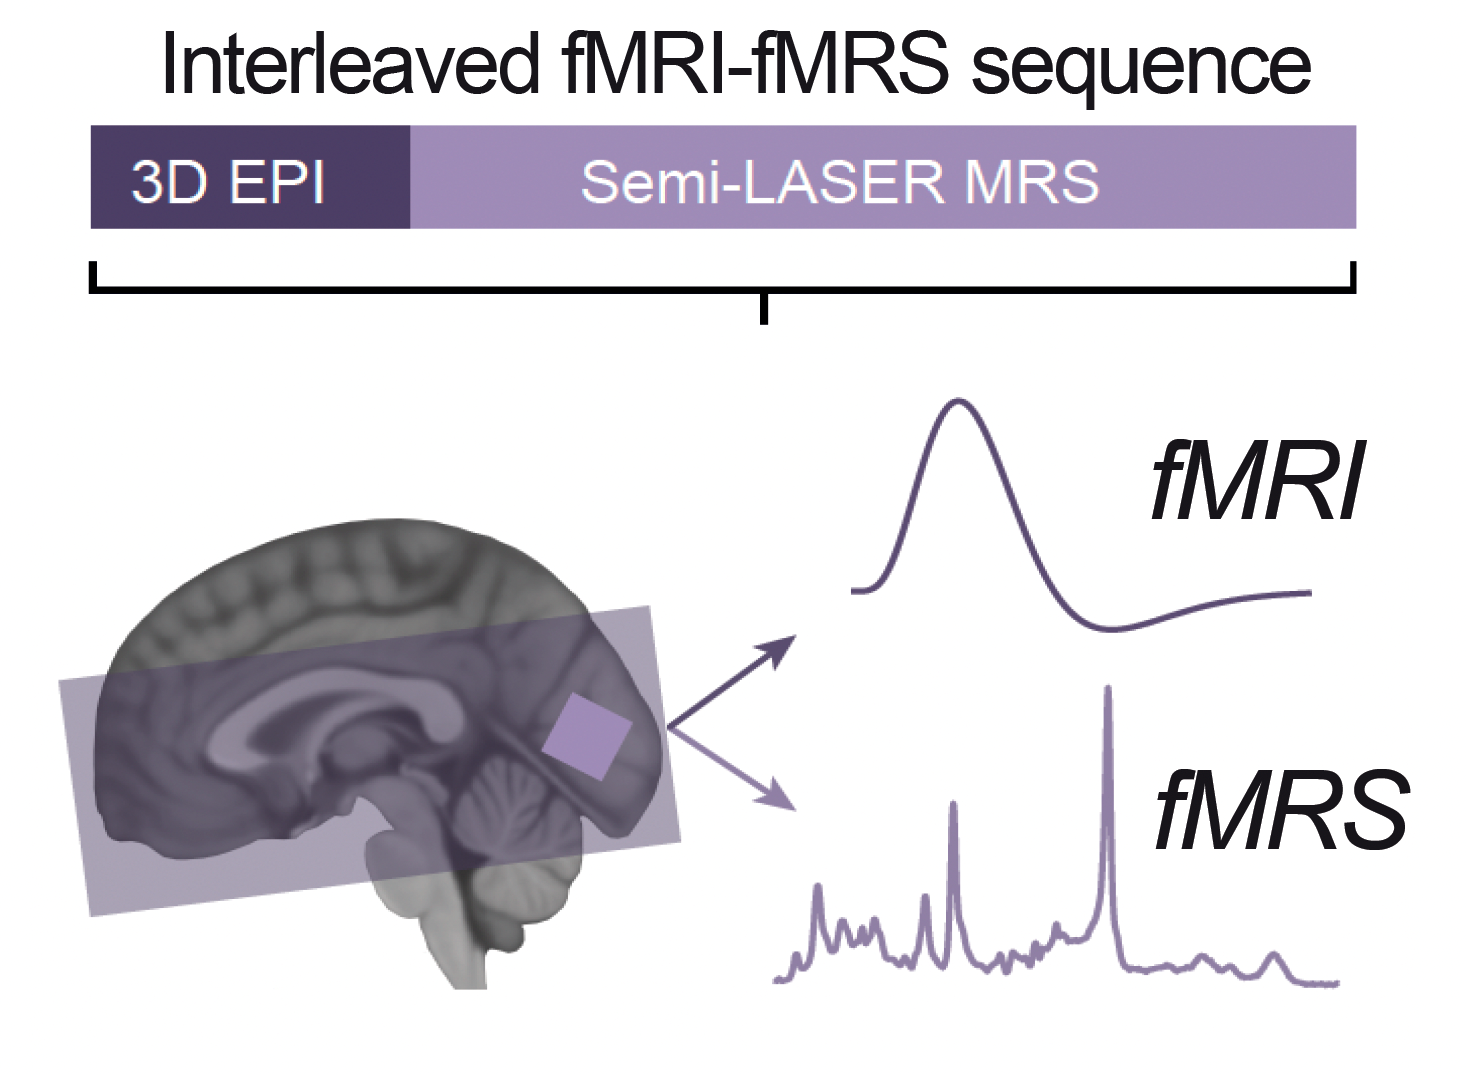 Figure showing the interleaved fMRI-fMRS sequence. Below, a parasaggital image of a human brain with a location marked, and two read-outs from the region- fMRI and fMRS